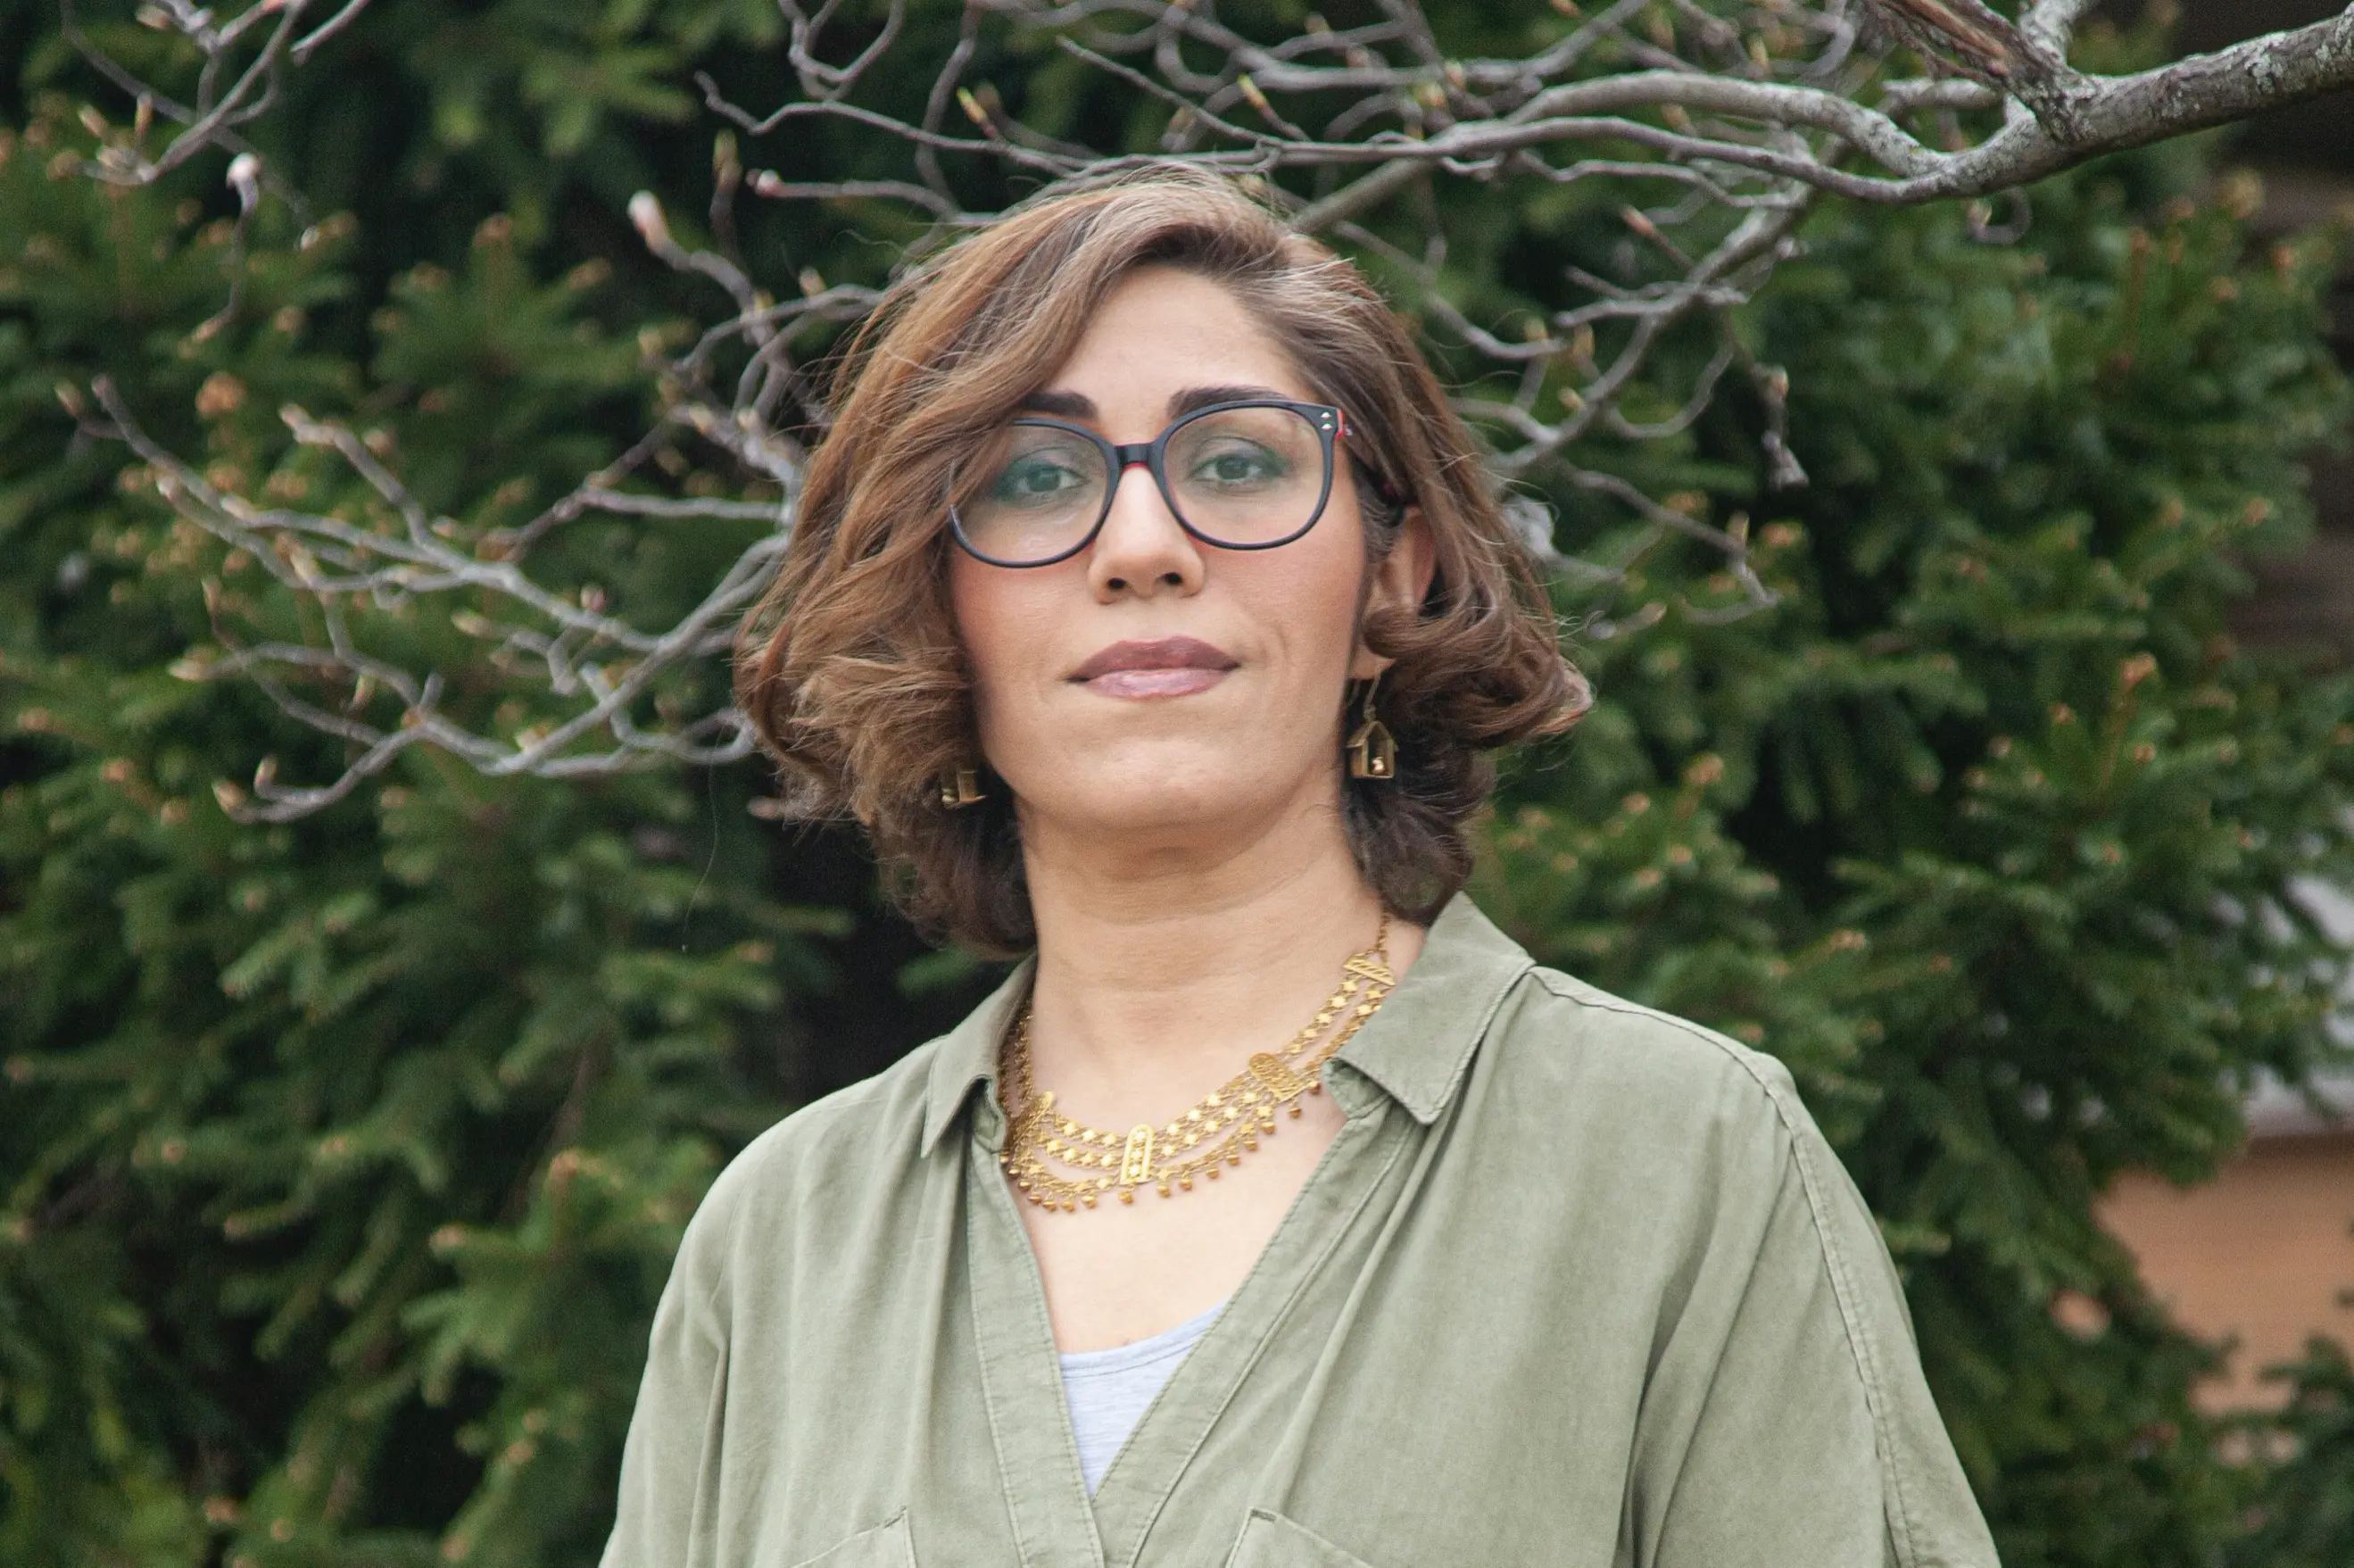 Photo portrait of Maryam outside with brown hair, large round glasses with a earth green blouse.